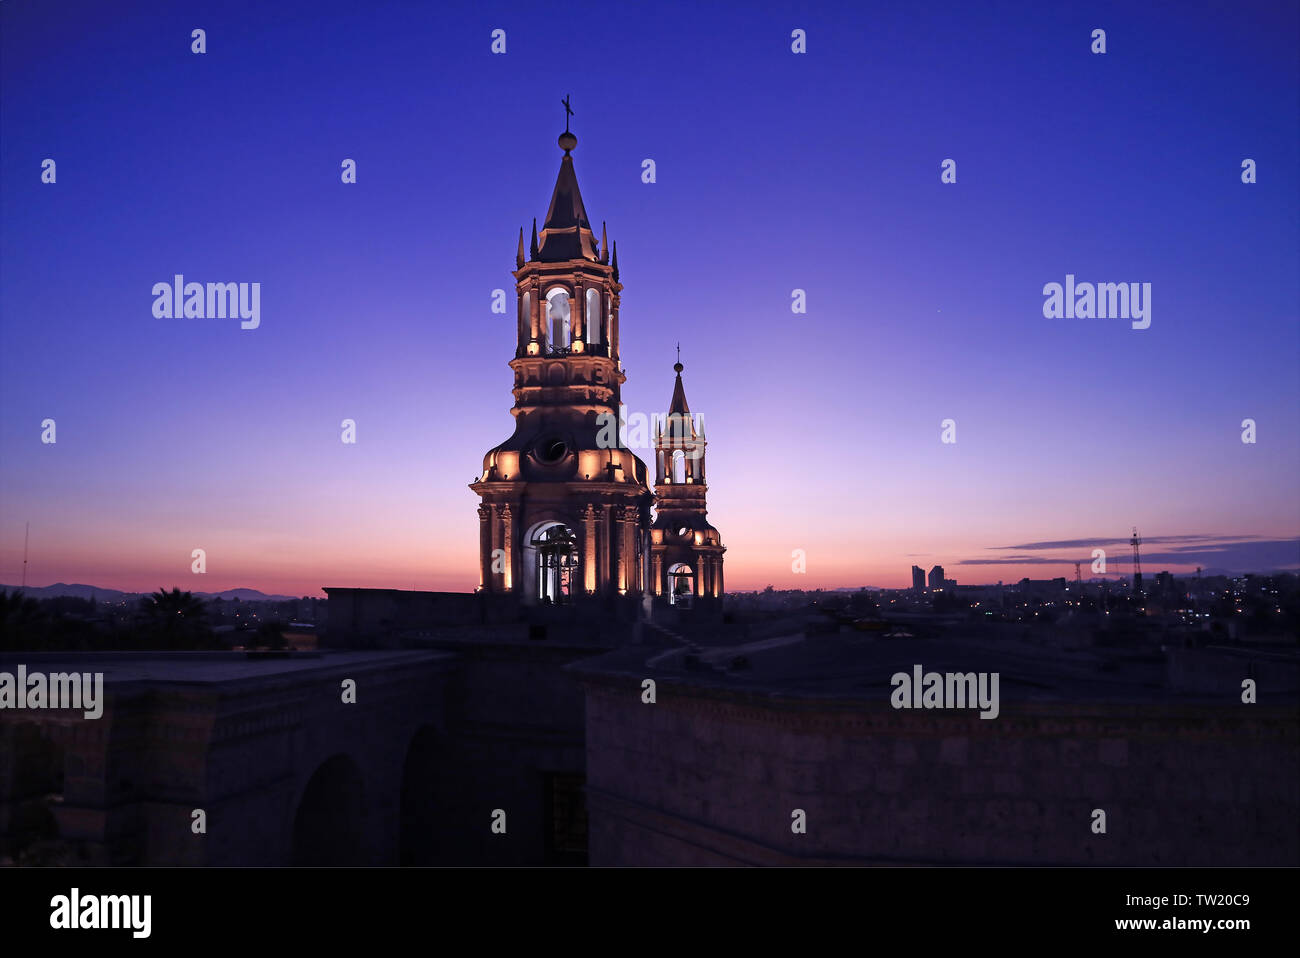 The Bell Tower of Basilica Cathedral of Arequipa Against Breathtaking Sunset Sky, Arequipa, Peru, South America Stock Photo